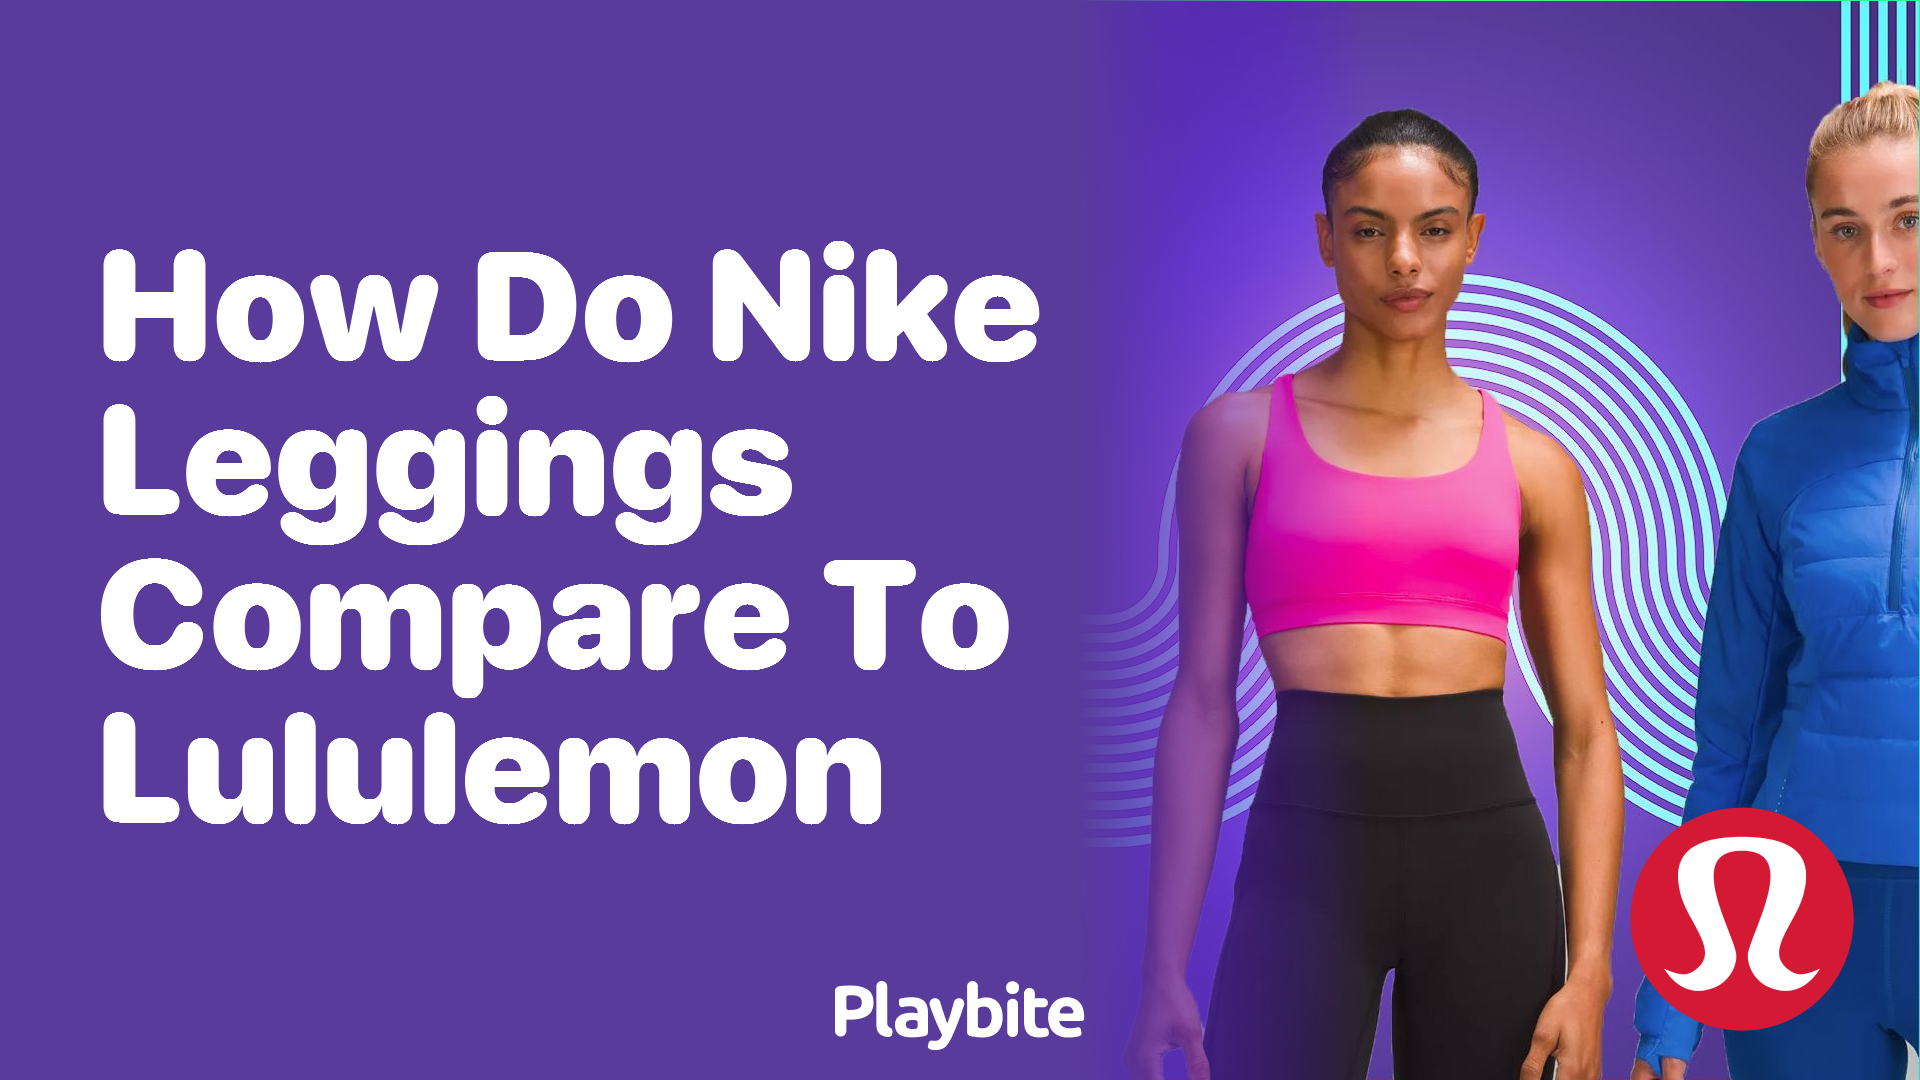 How Do Nike Leggings Compare to Lululemon? Find Out Here! - Playbite